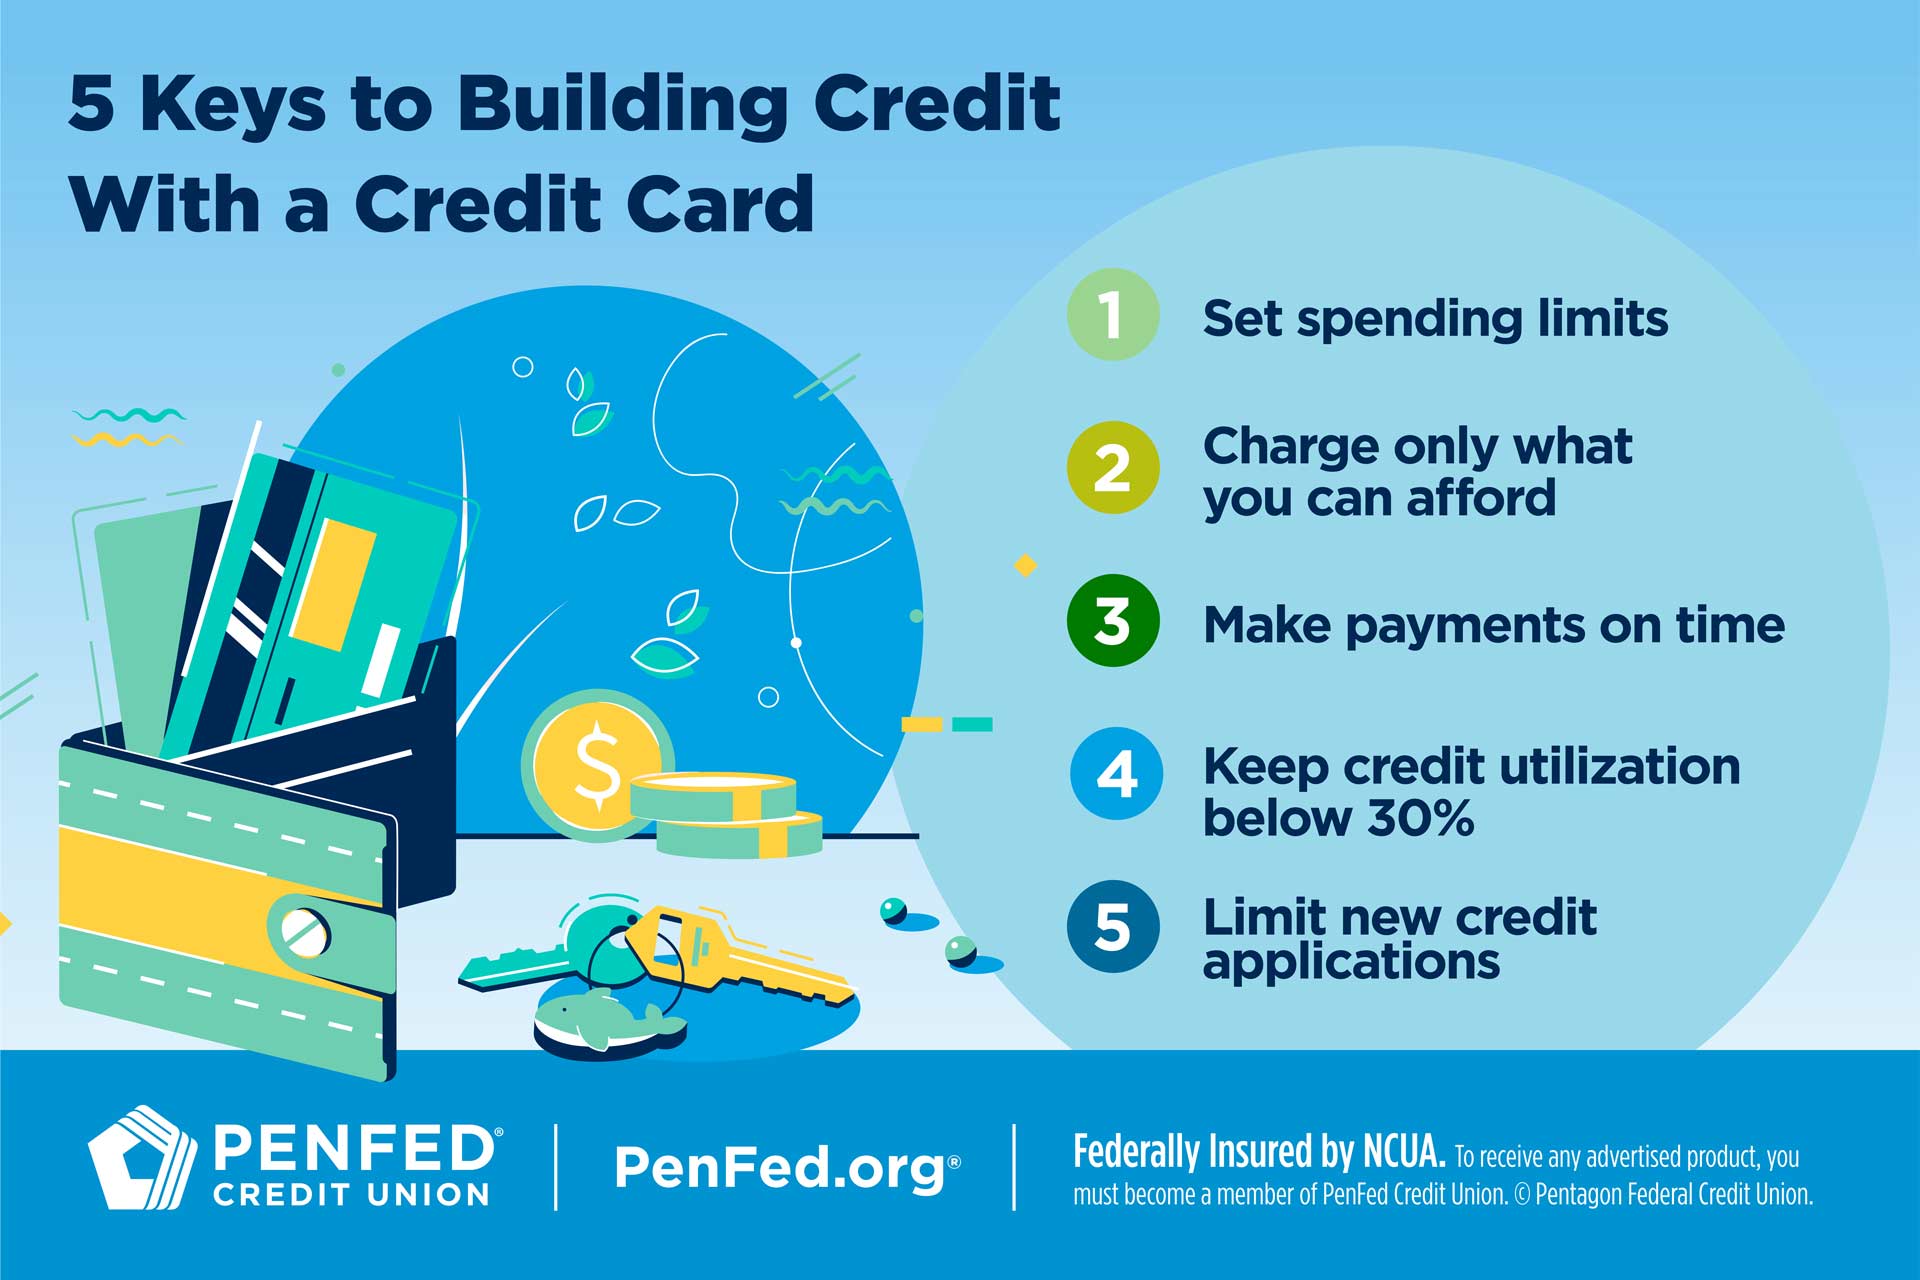 Infographic on 5 keys to building credit with a credit card